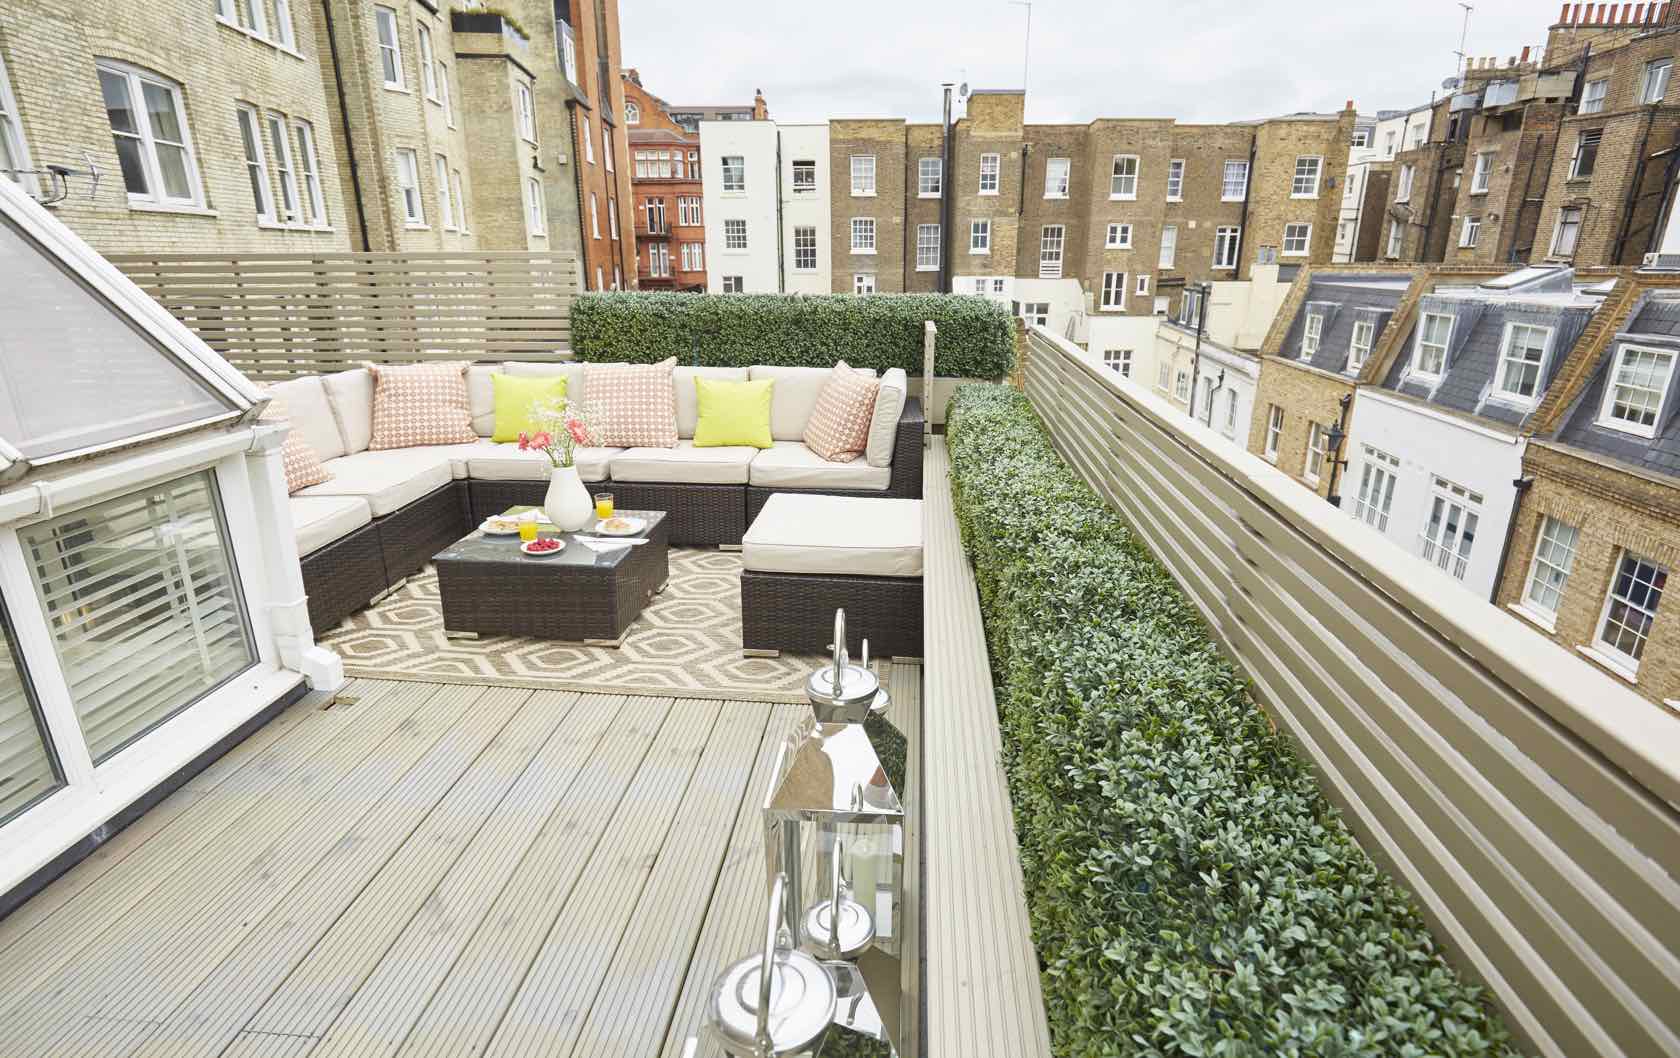 Danebury Apartment Rooftop Notting Hill